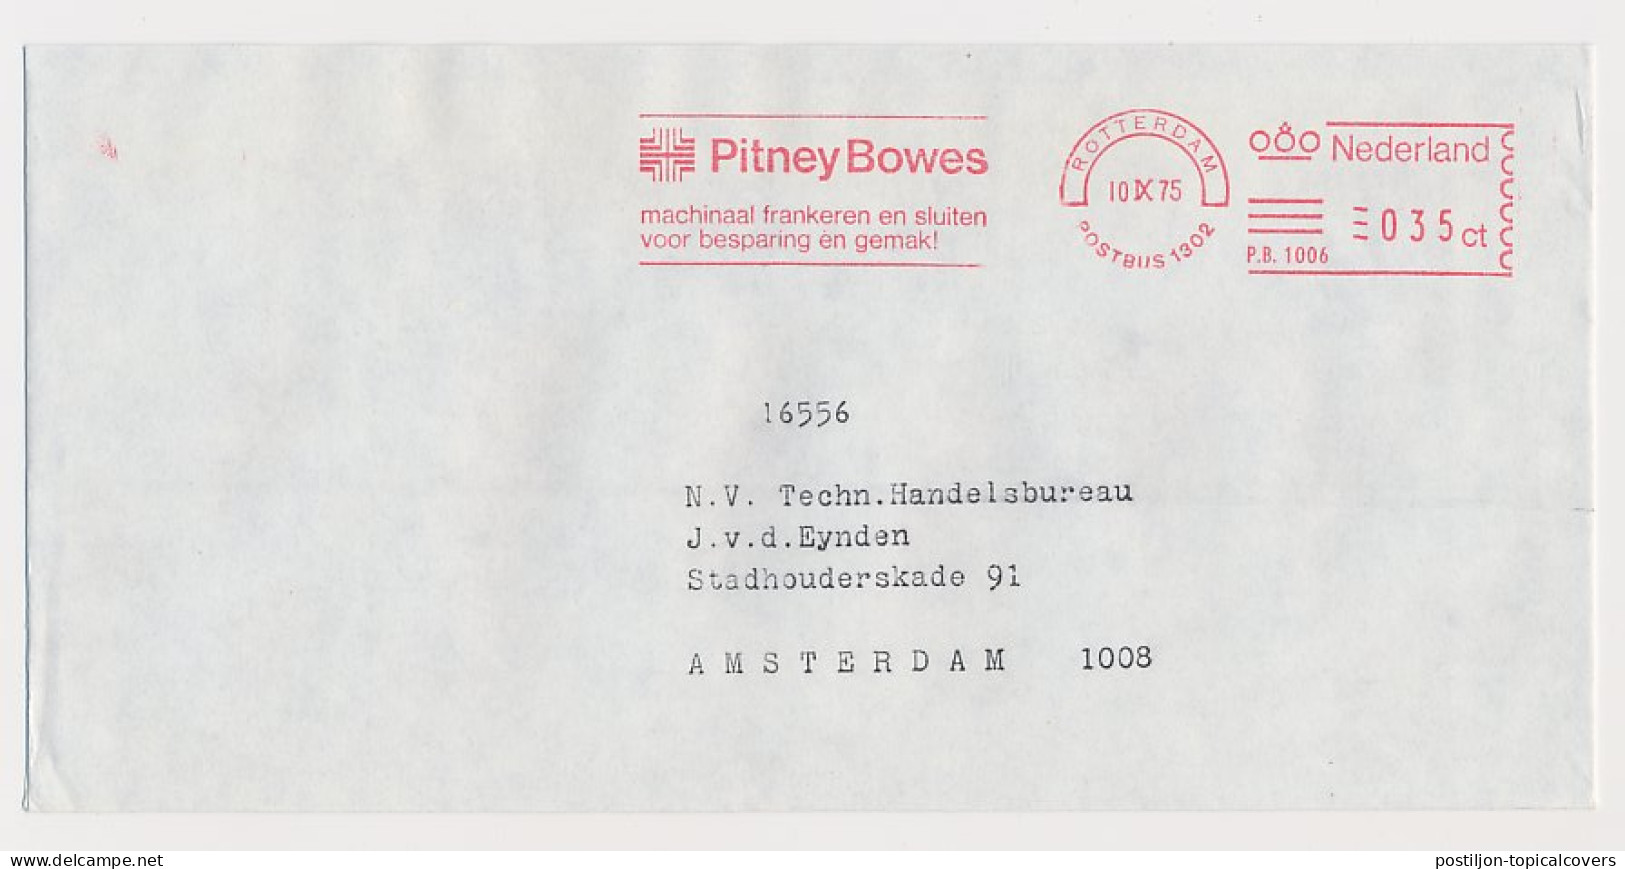 Meter Cover Netherlands 1975 Pitney Bowes - Rotterdam - Machine Labels [ATM]